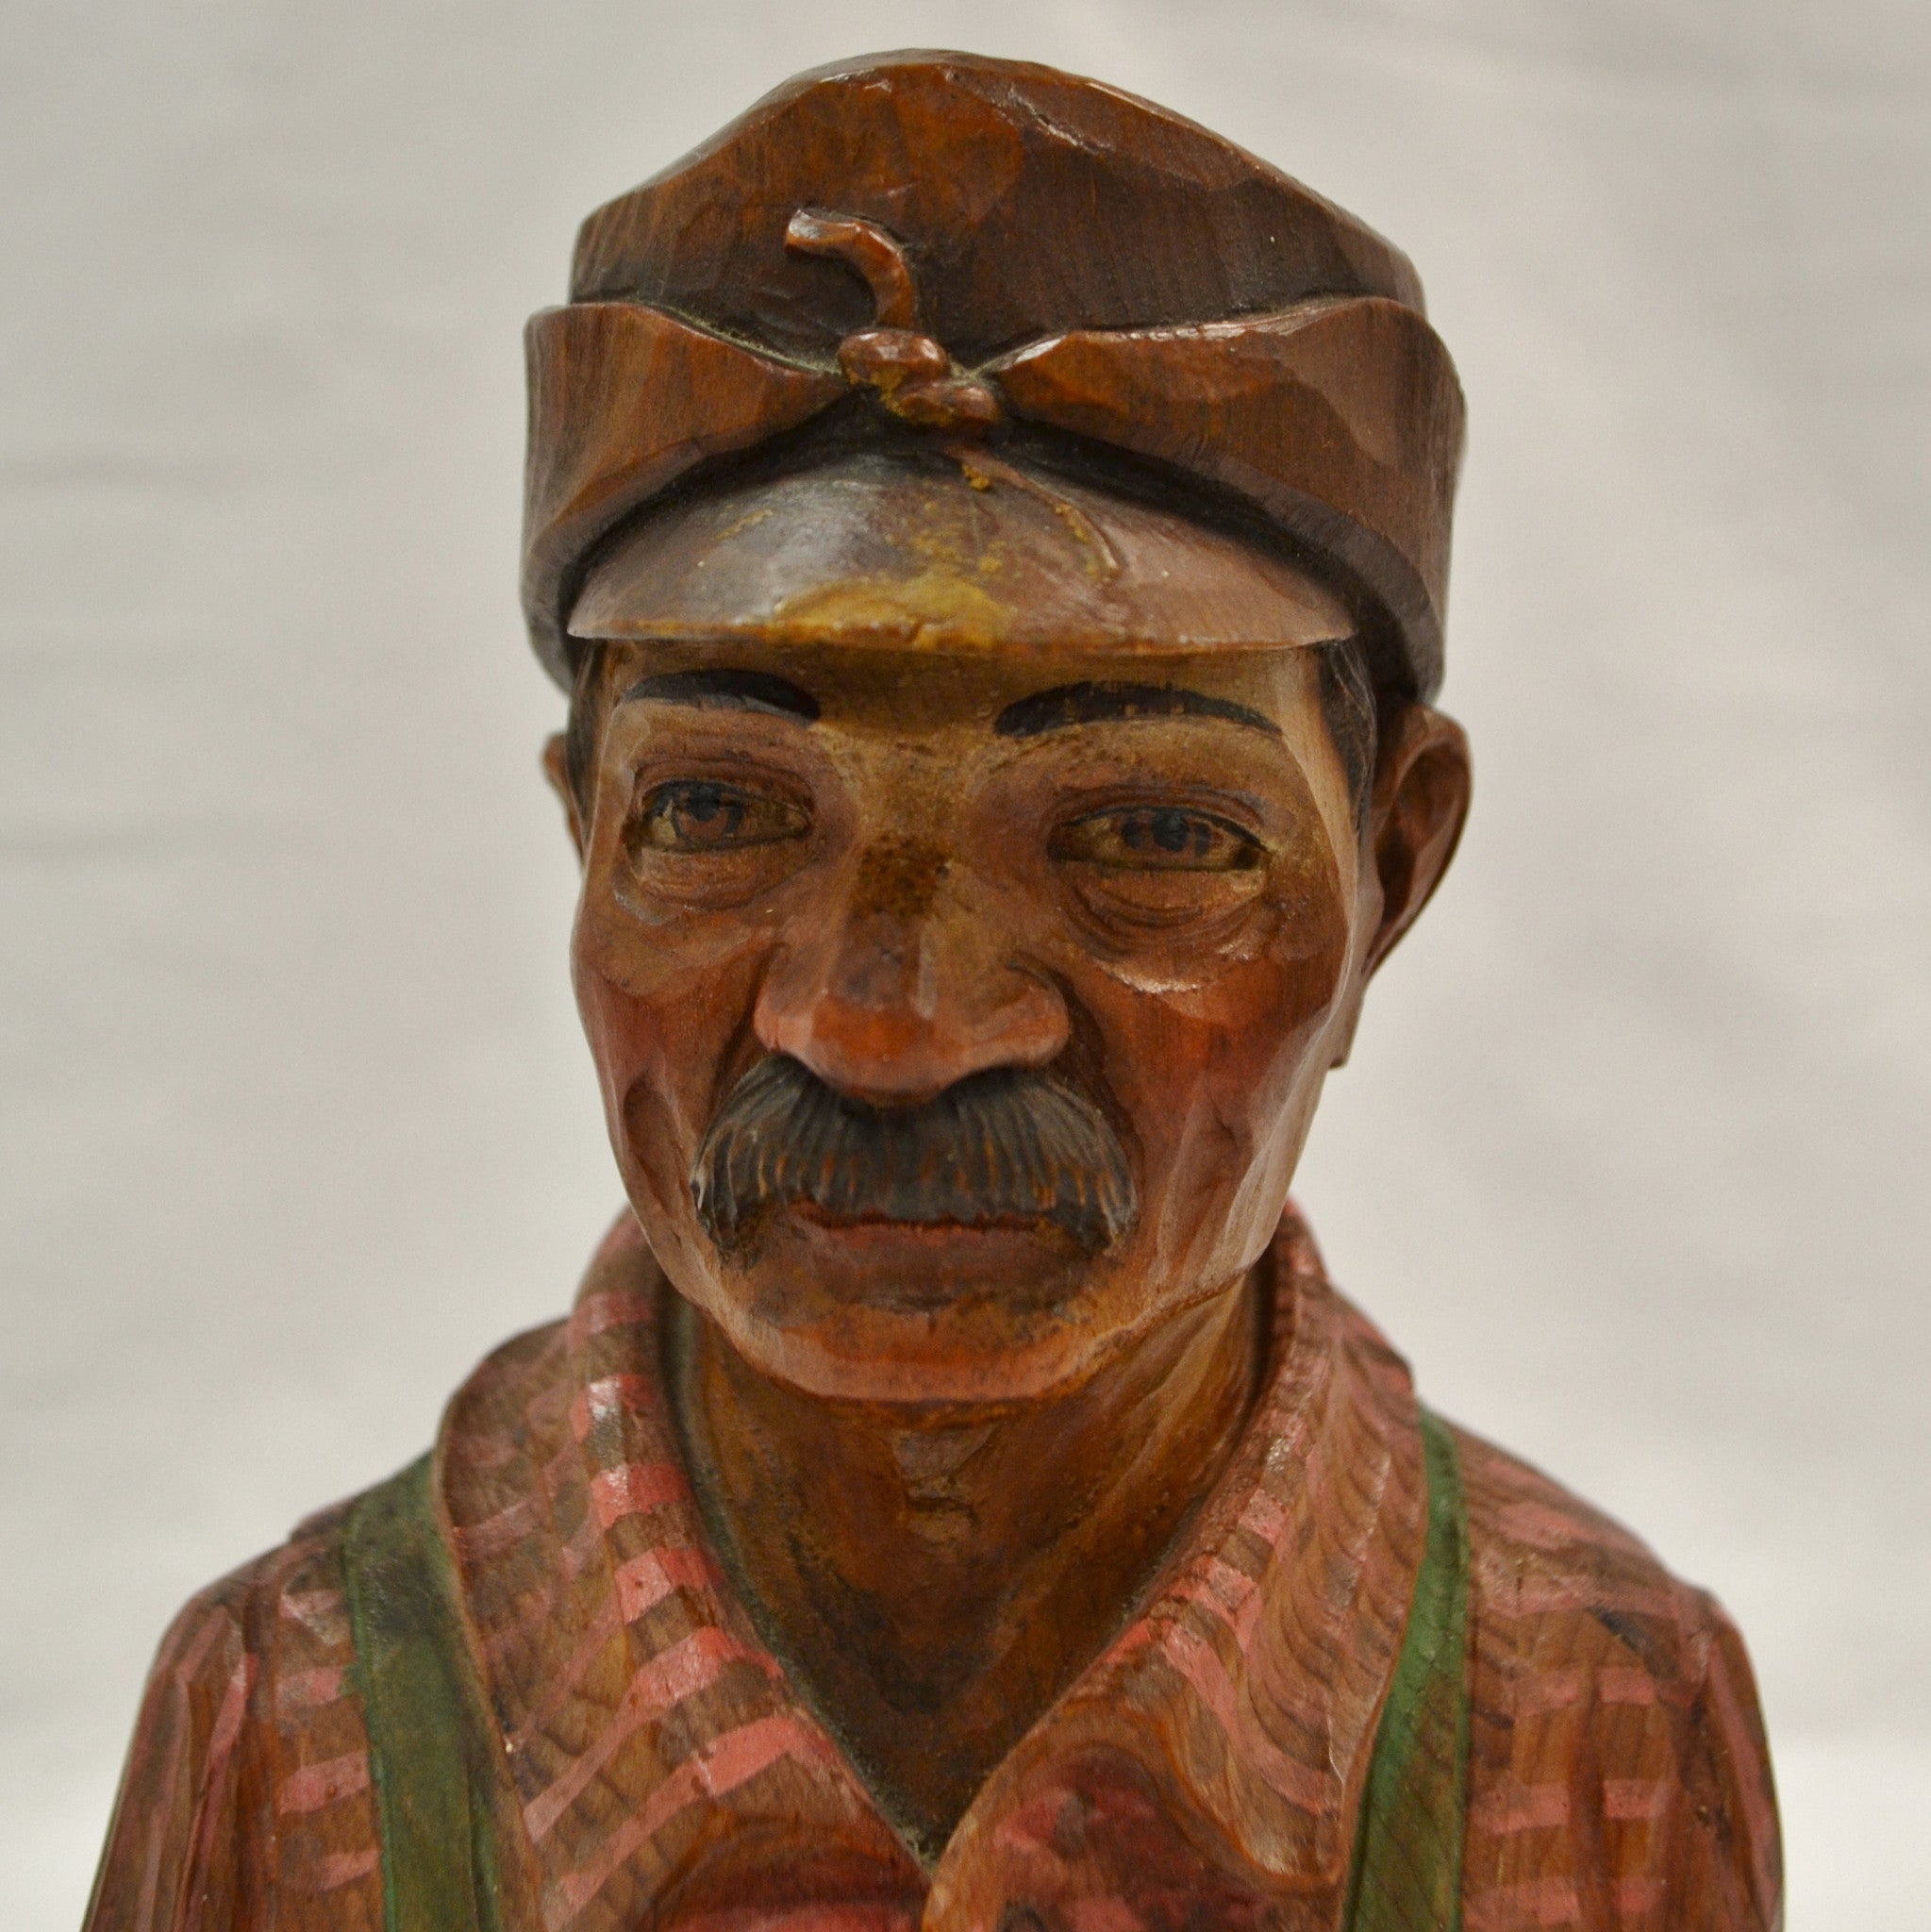 lumberjack bust wood carving by Duquet